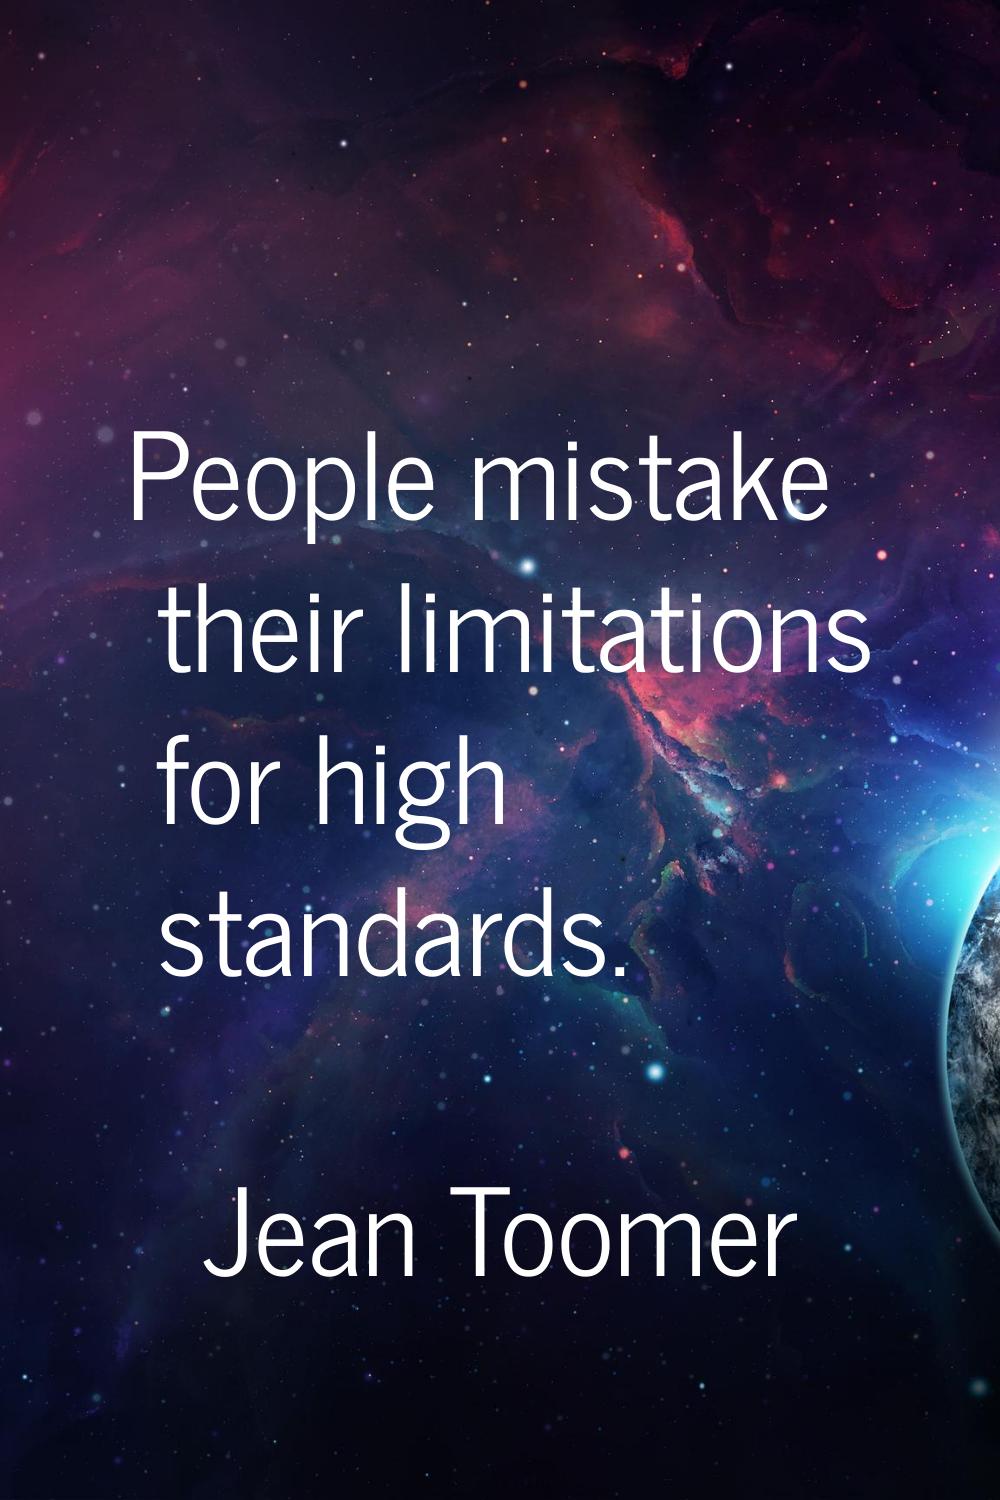 People mistake their limitations for high standards.